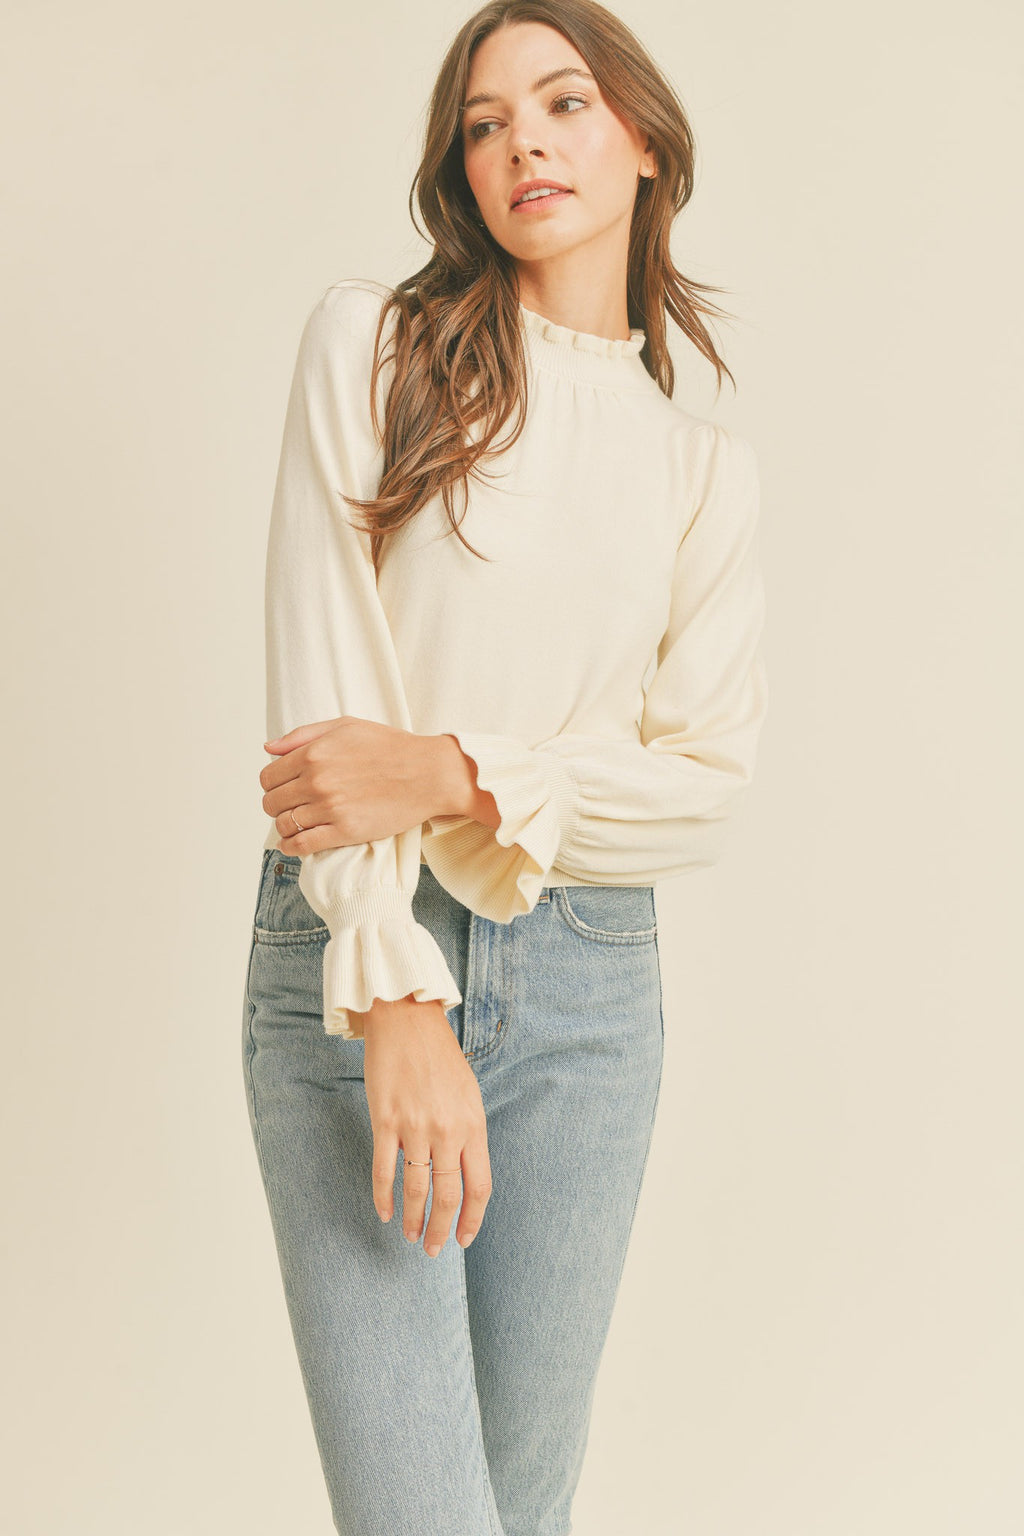 Perfectly Ruffled Pull Over Sweater FINAL SALE